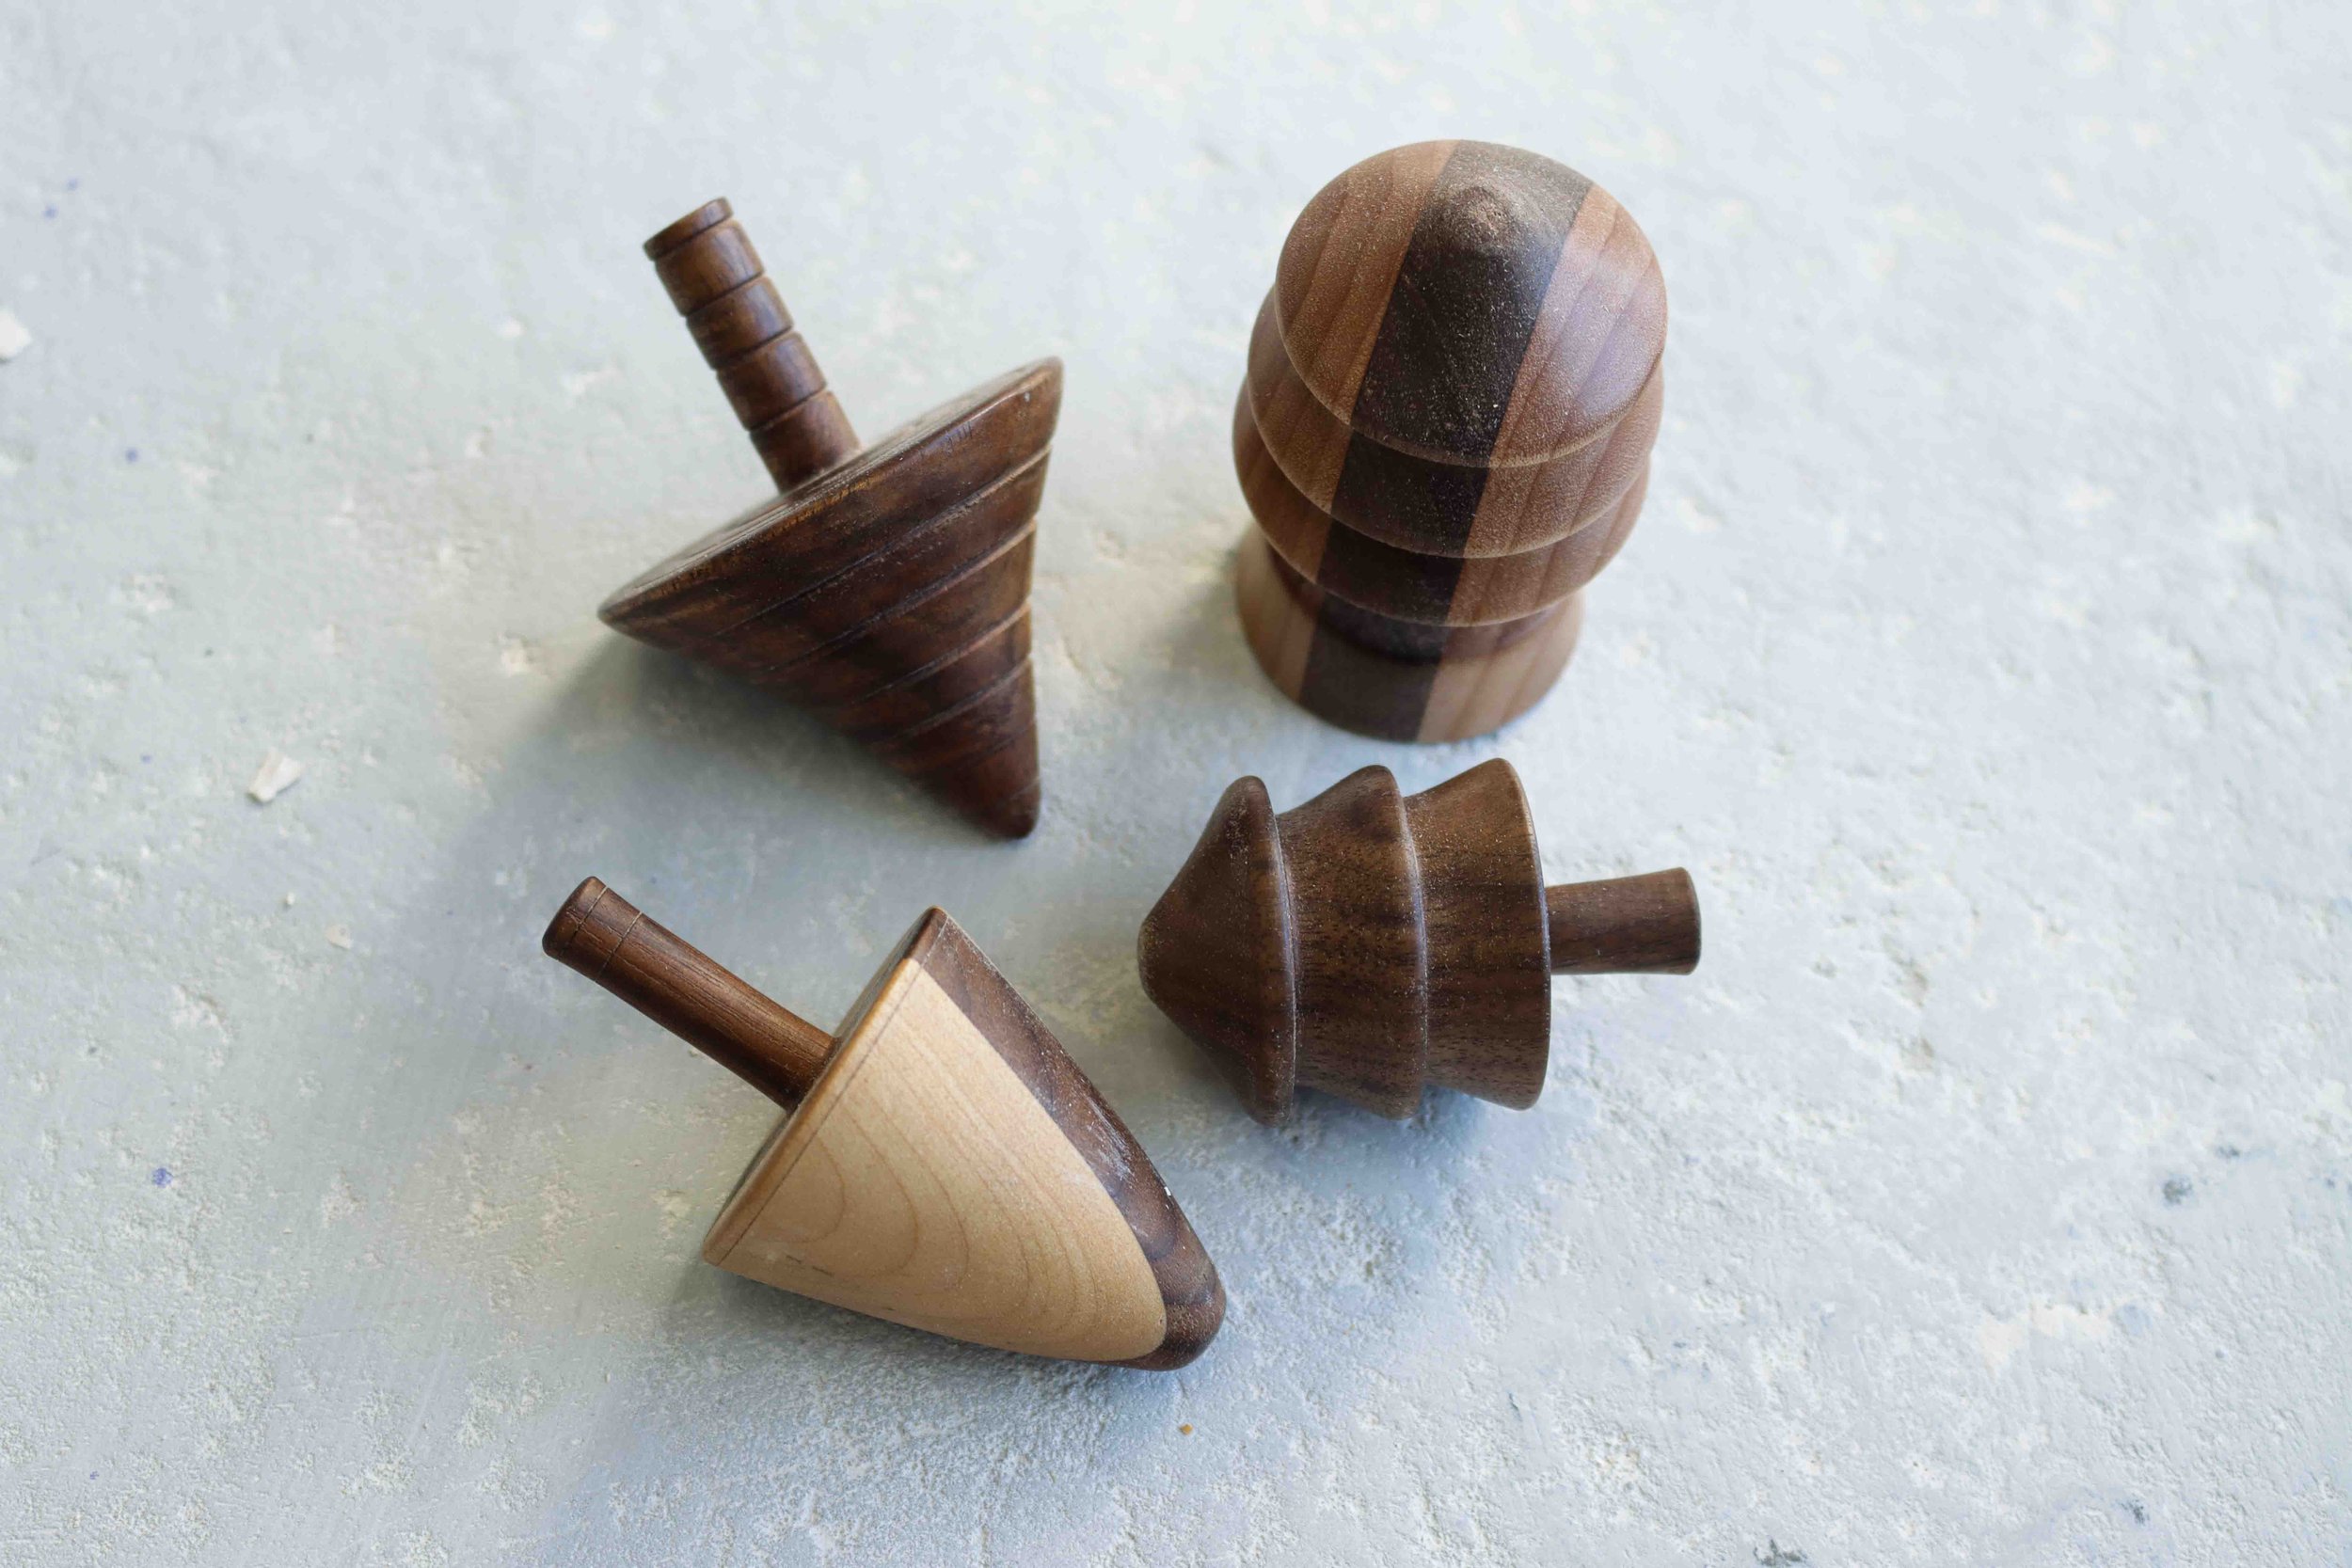 Four wooden spindles turned on the lathe (Copy) (Copy)